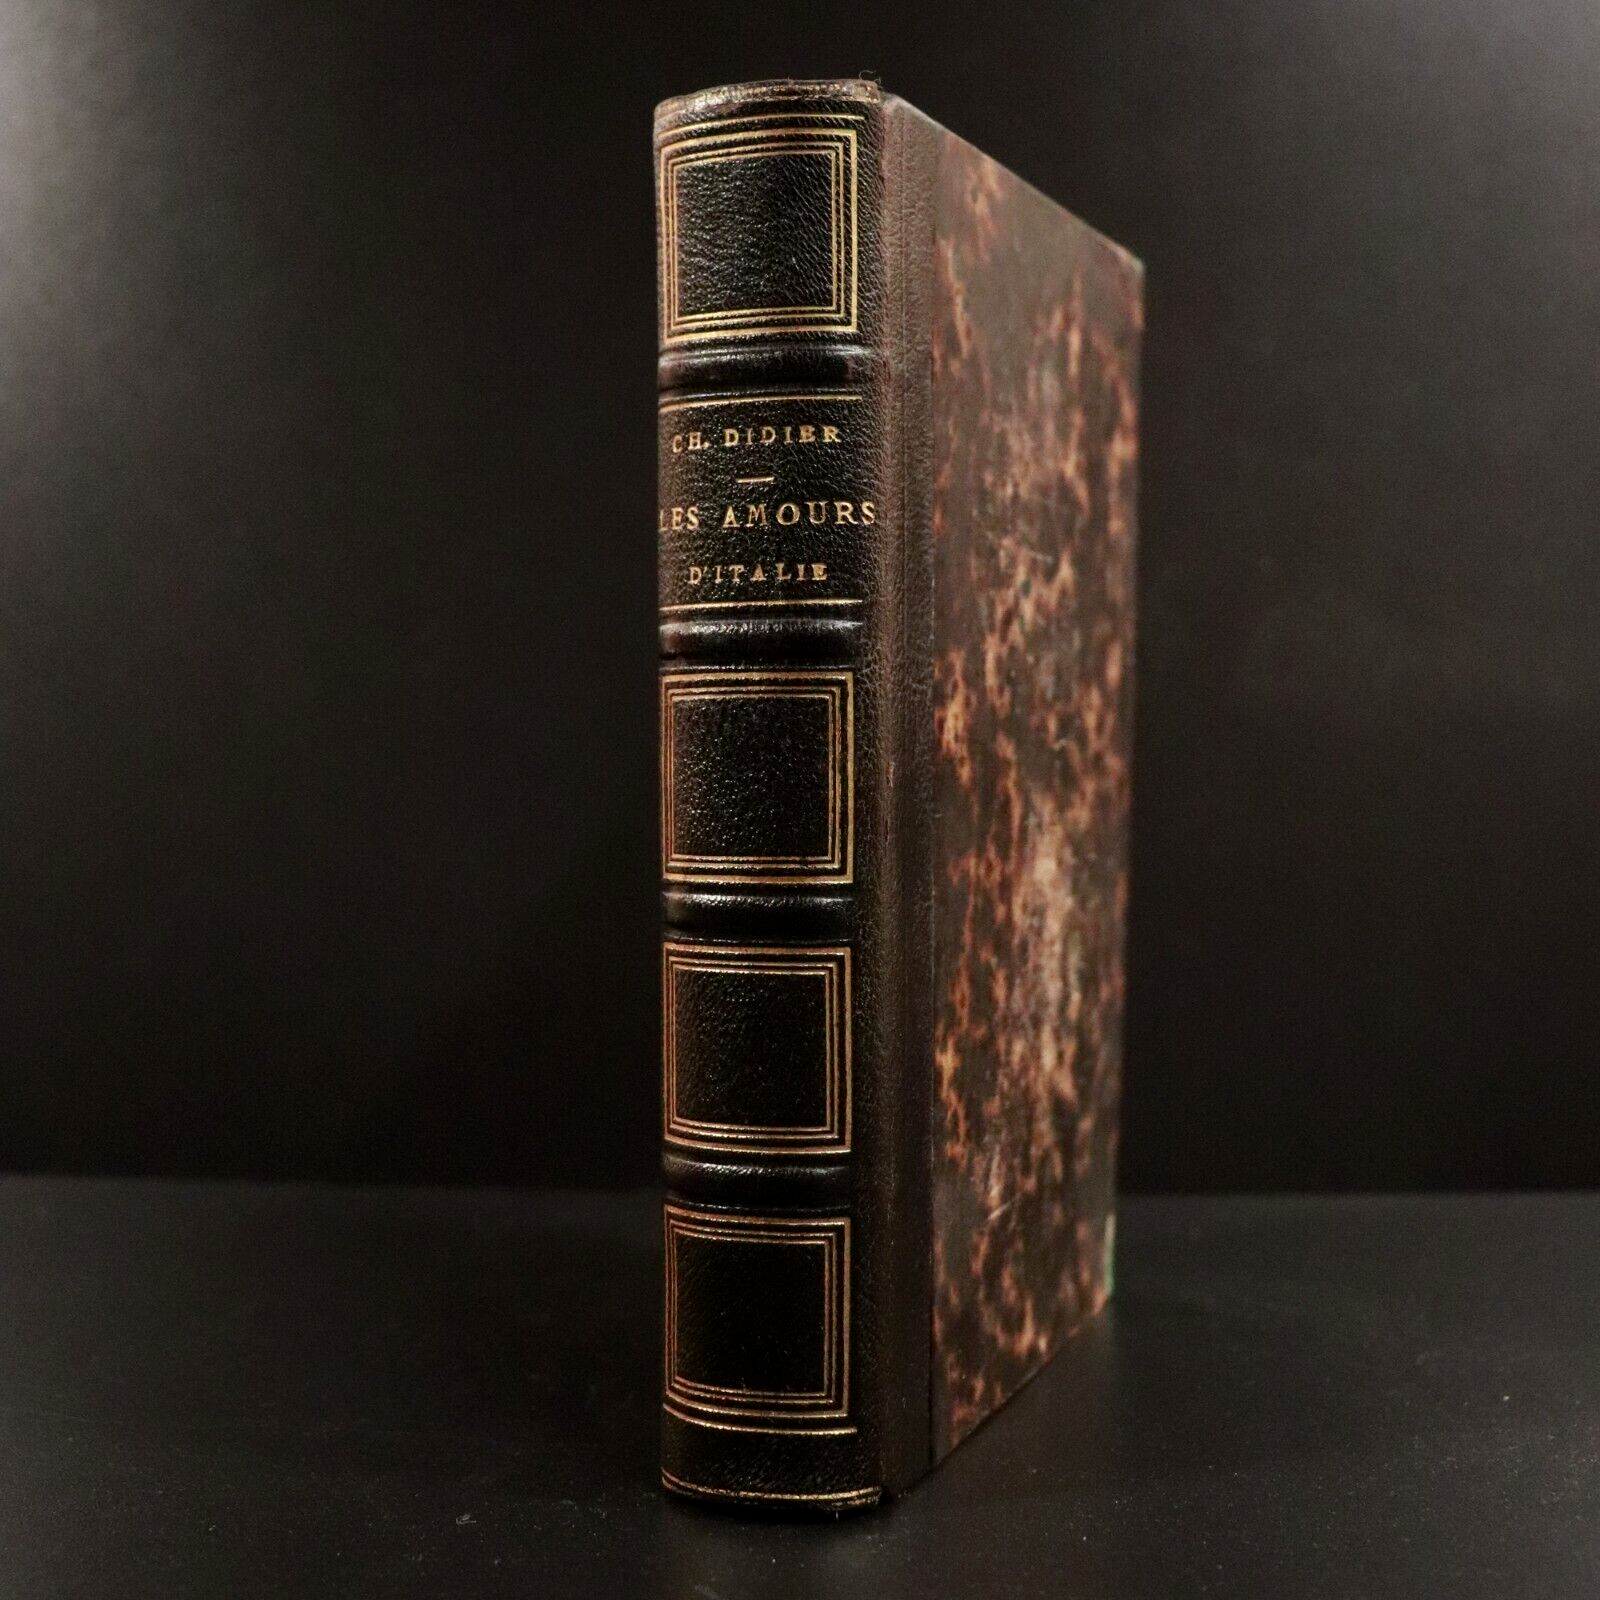 1859 Les Amours D'Italie by Charles Didier 1st Edition Rare Antiquarian Book